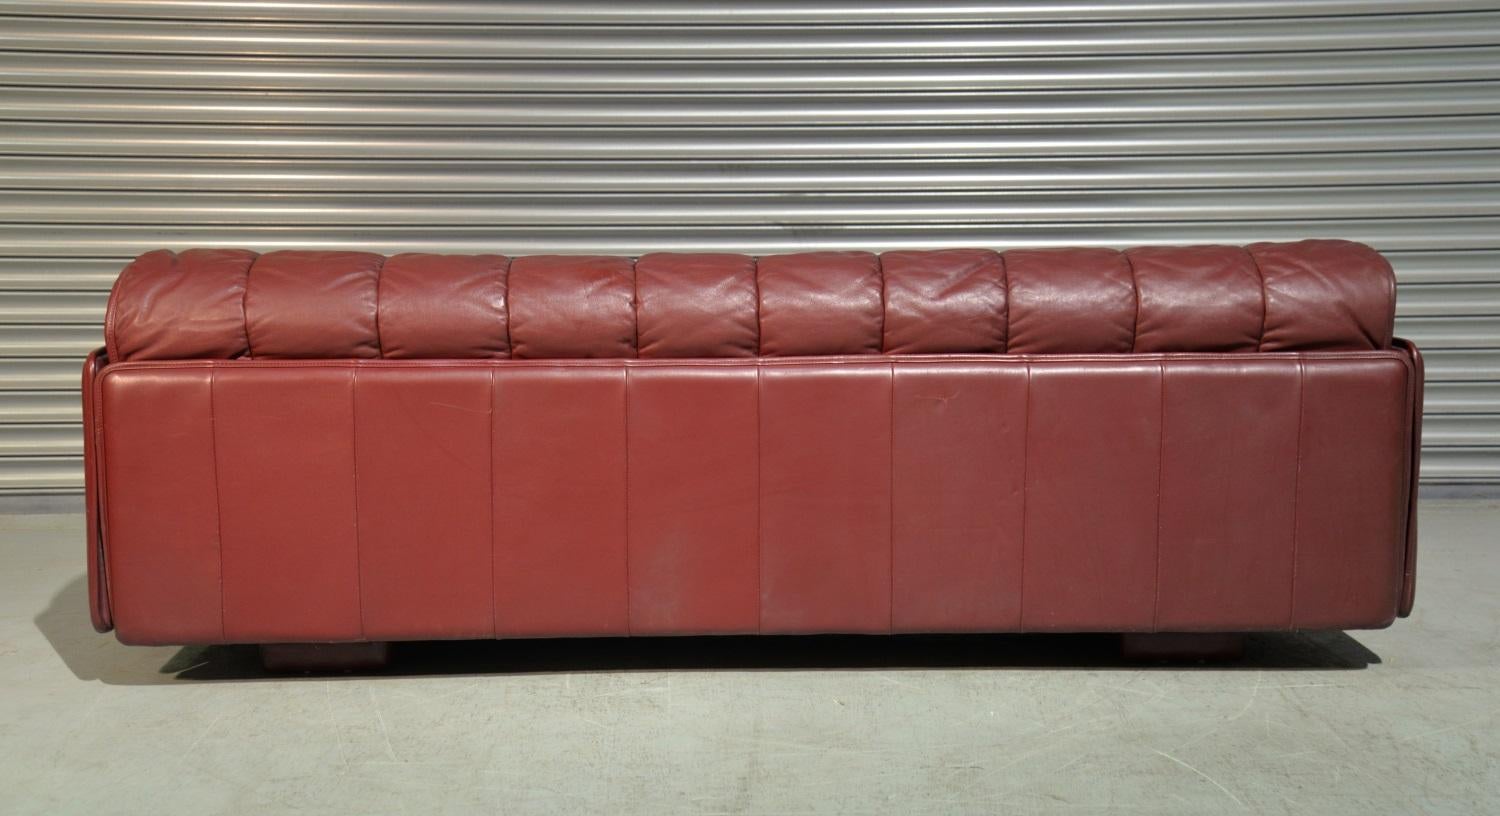 Late 20th Century Vintage De Sede Patchwork Leather Sofa / Daybed, Switzerland, 1970s For Sale